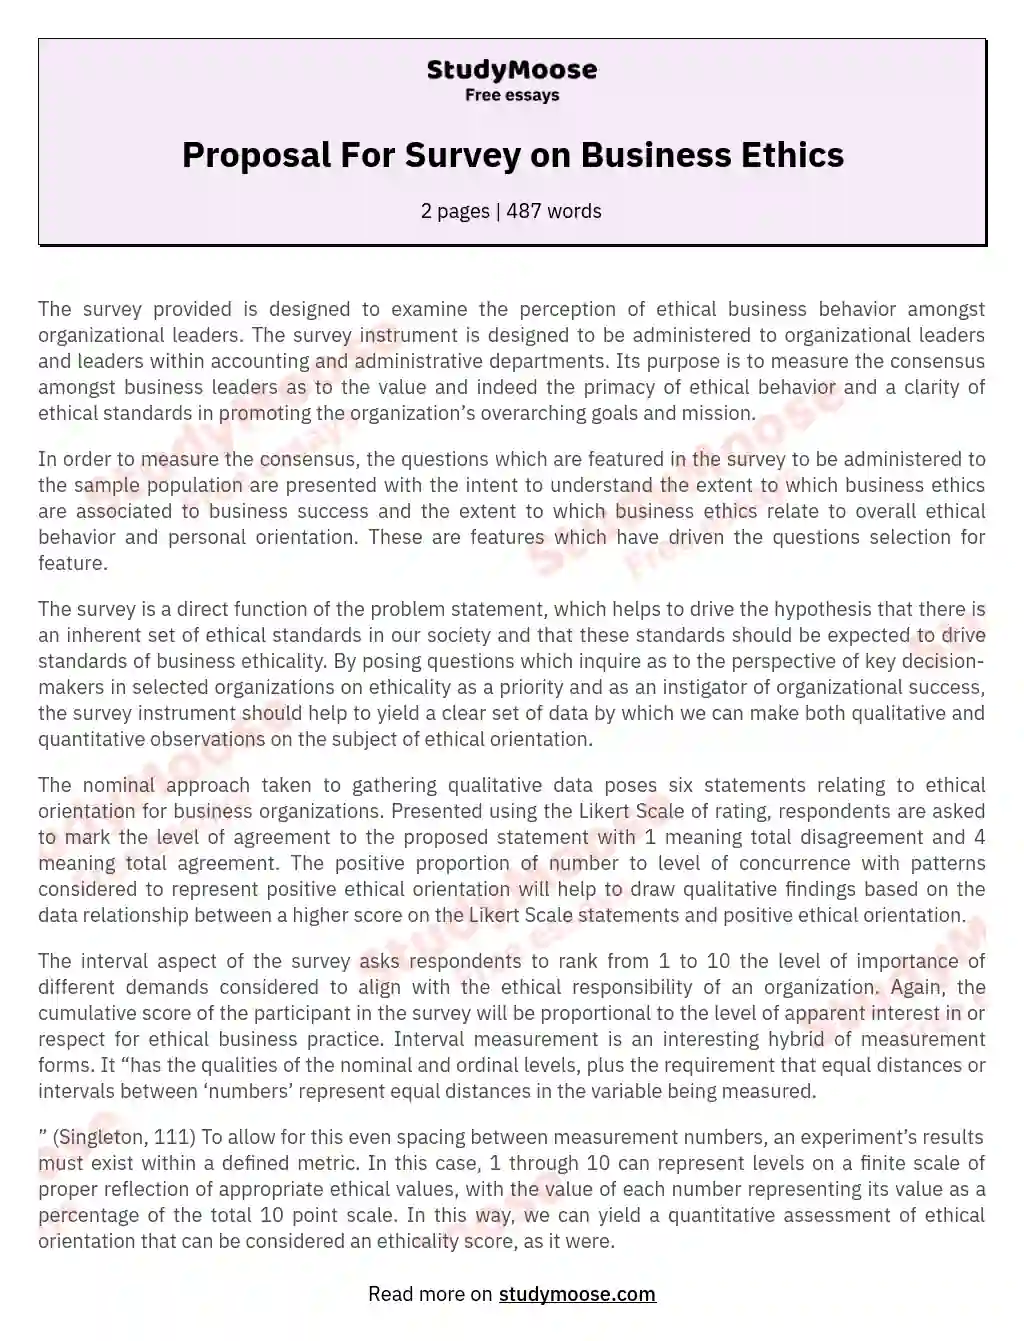 Proposal For Survey on Business Ethics essay